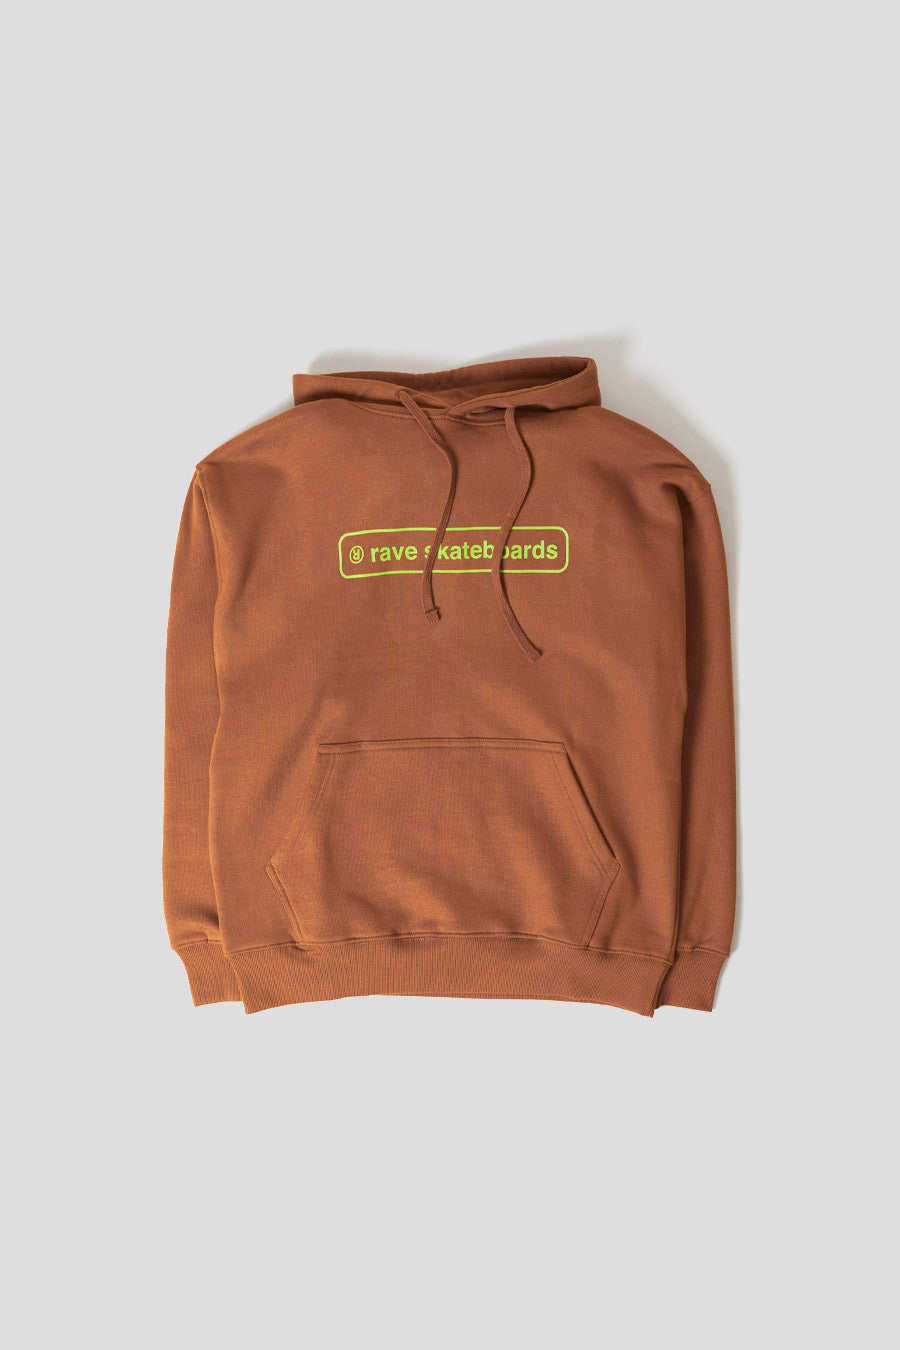 RAVE SKATEBOARDS - CORE LOGO HOODIE BROWN - LE LABO STORE